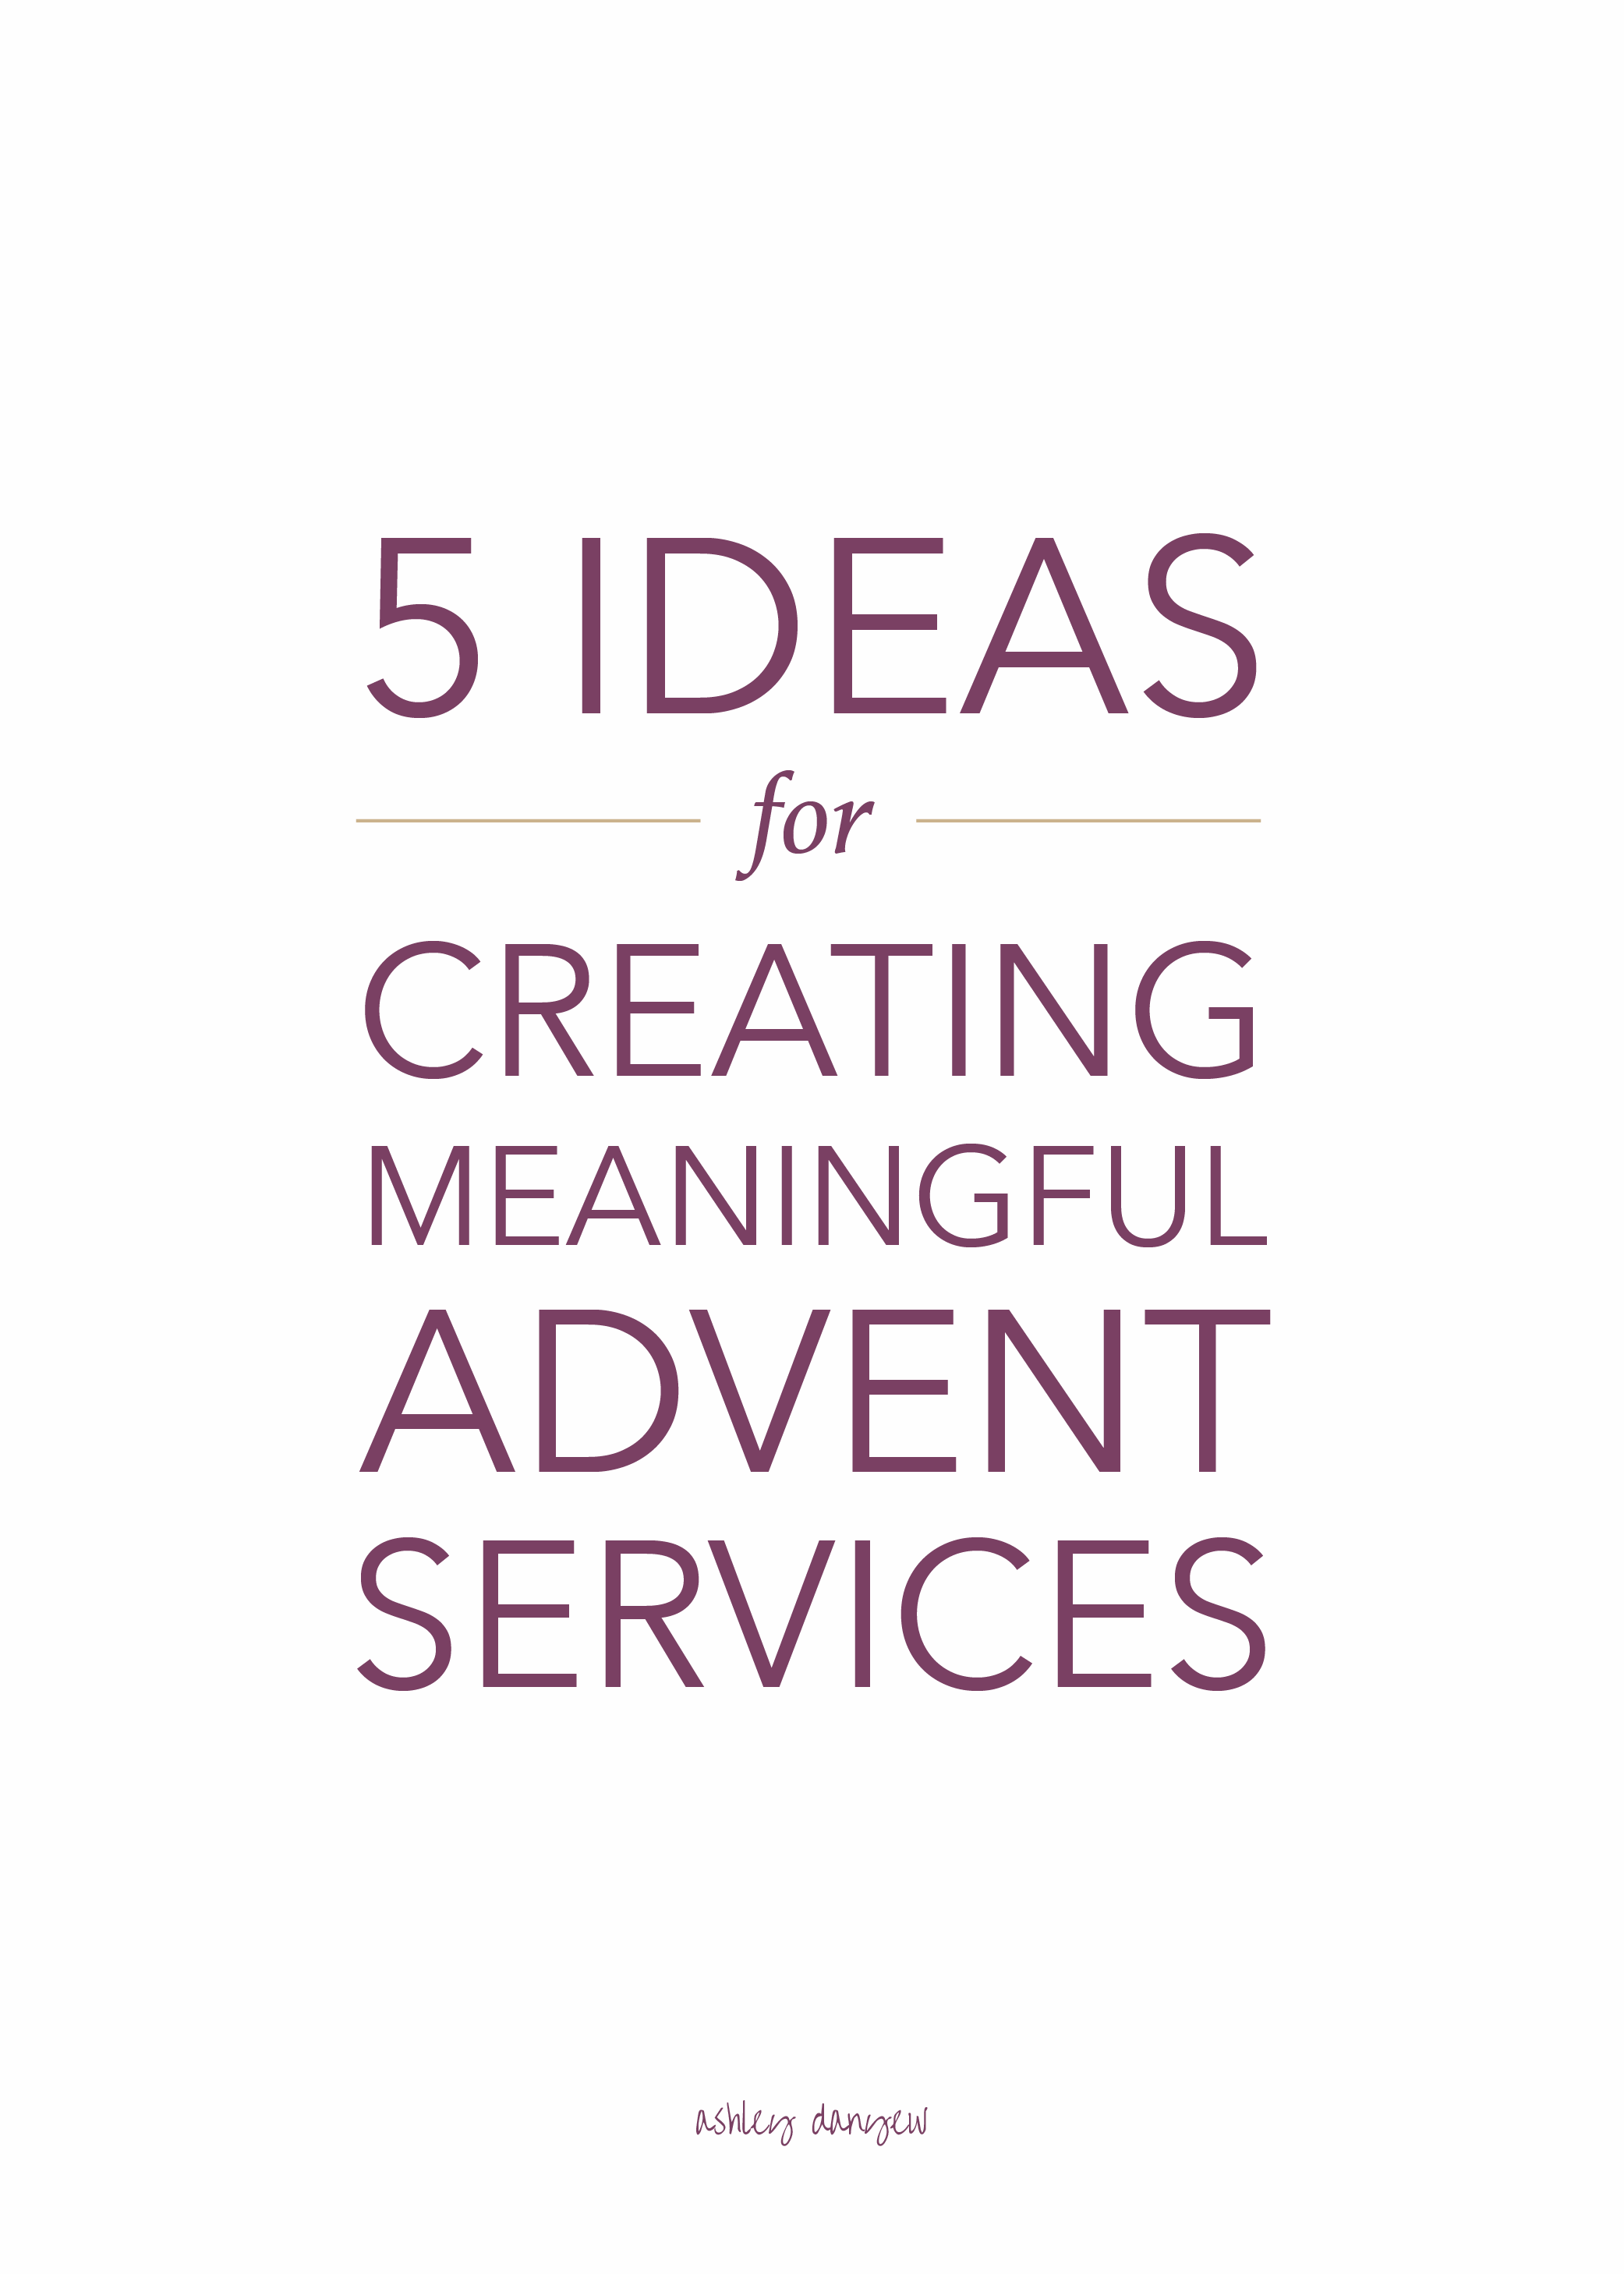 Copy of 5 Ideas for Creating Meaningful Advent Services